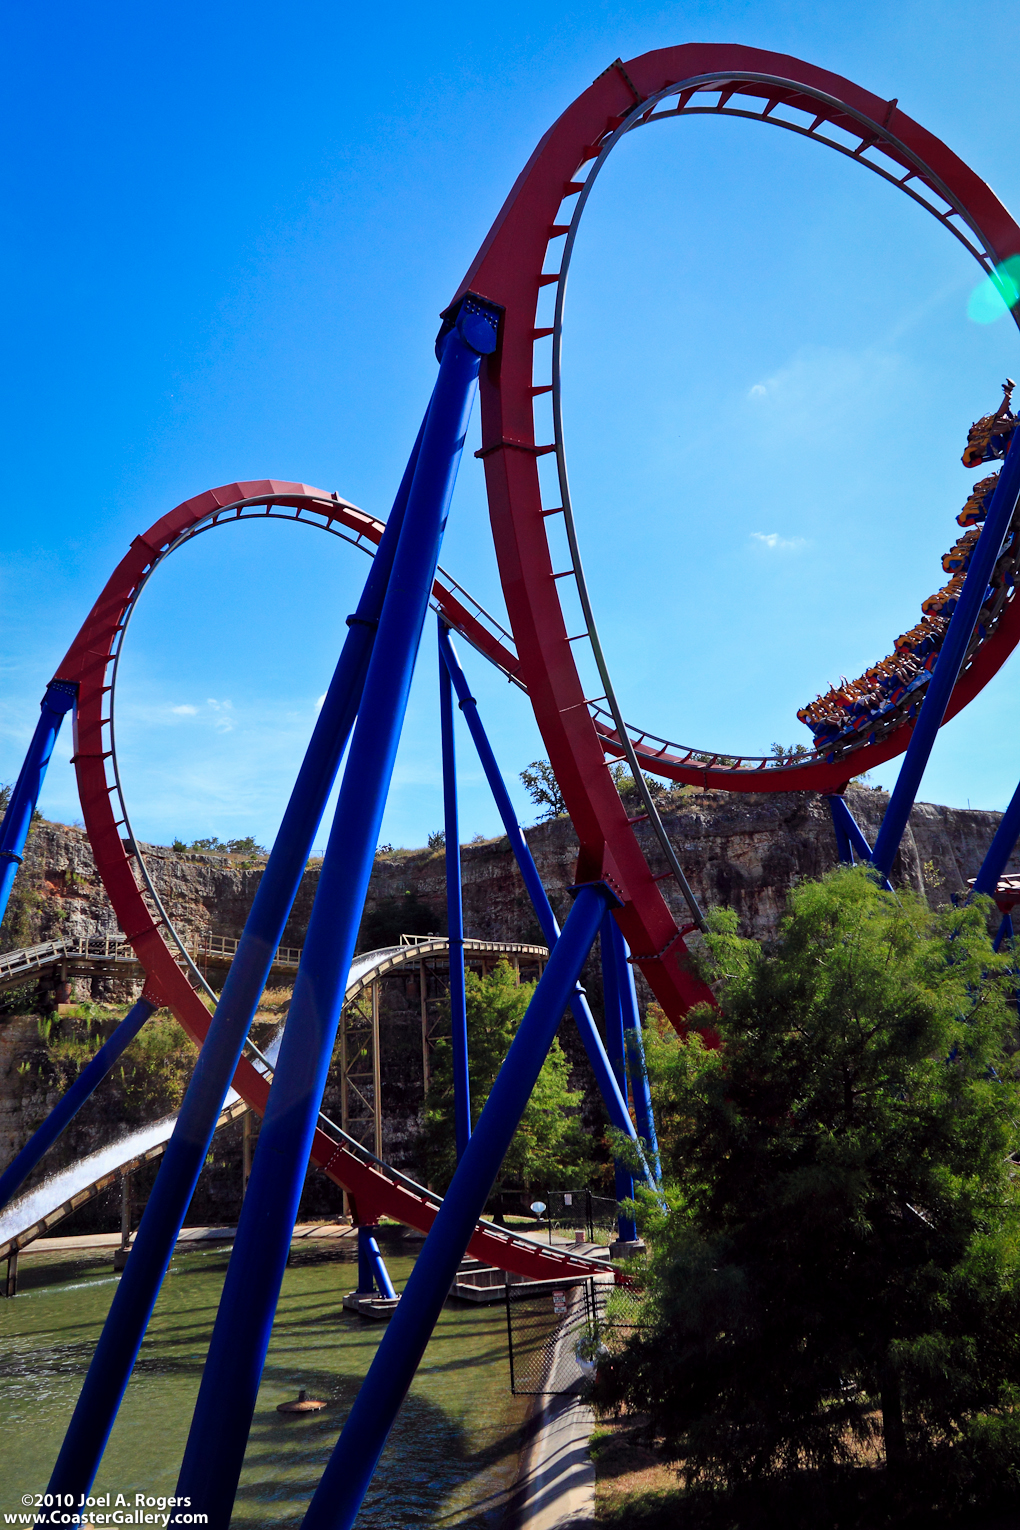 Cobra Roll inversion on a B and M roller coaster at Six Flags Fiesta Texas.